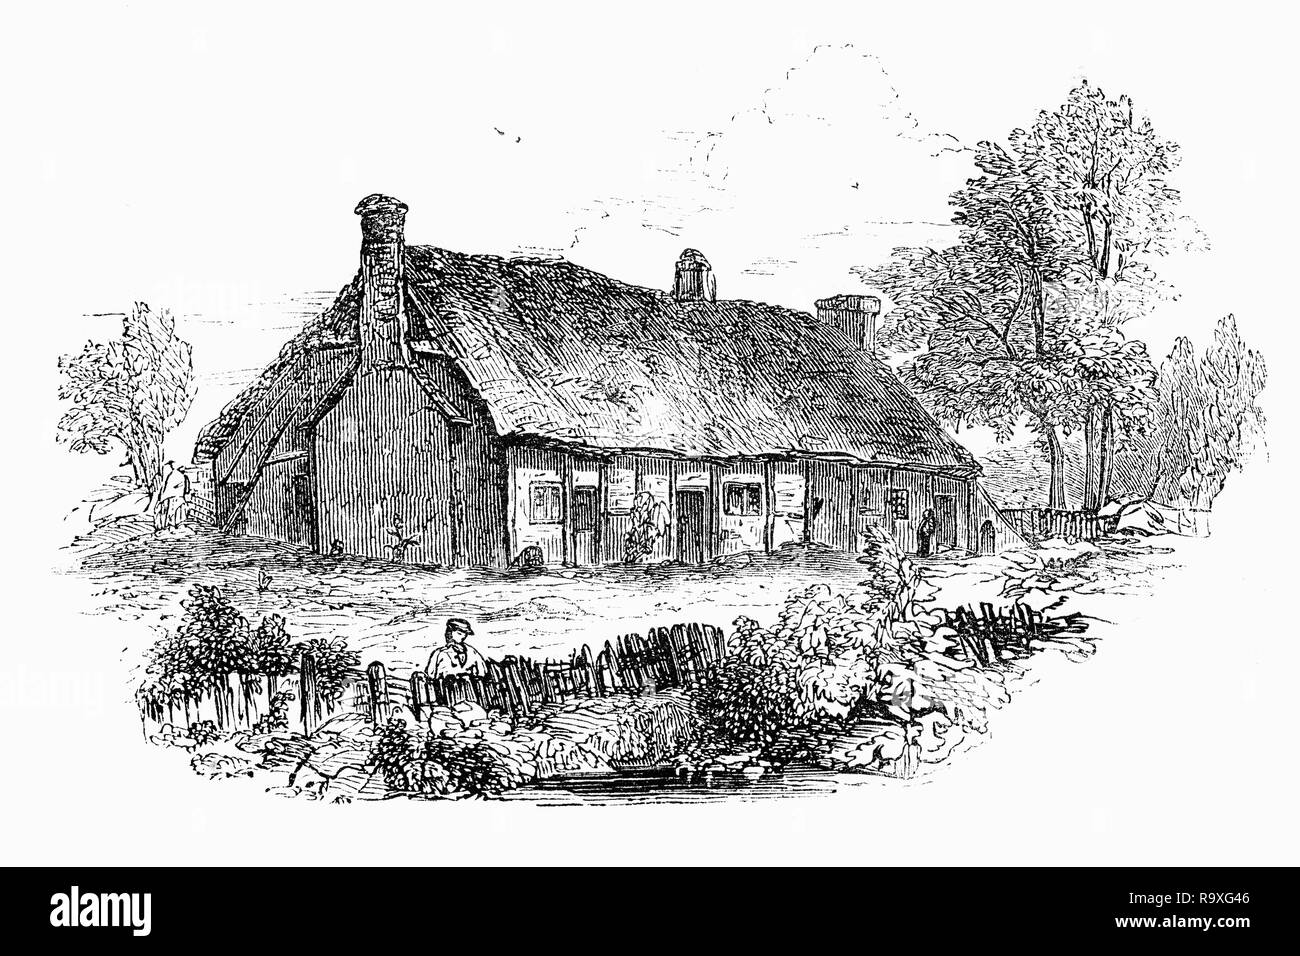 The cottage in Strensham, Worcestershire, England, where Samuel Butler (1613-1680) was born. He was a poet and satirist, remembered for a long satirical poem titled Hudibras, the most memorable burlesque poem in the English language and the first English satire to make a notable and successful attack on ideas rather than on personalities. It is directed against the fanaticism, pretentiousness, pedantry, and hypocrisy that Butler saw in militant Puritanism, extremes which he attacked wherever he saw them. Stock Photo